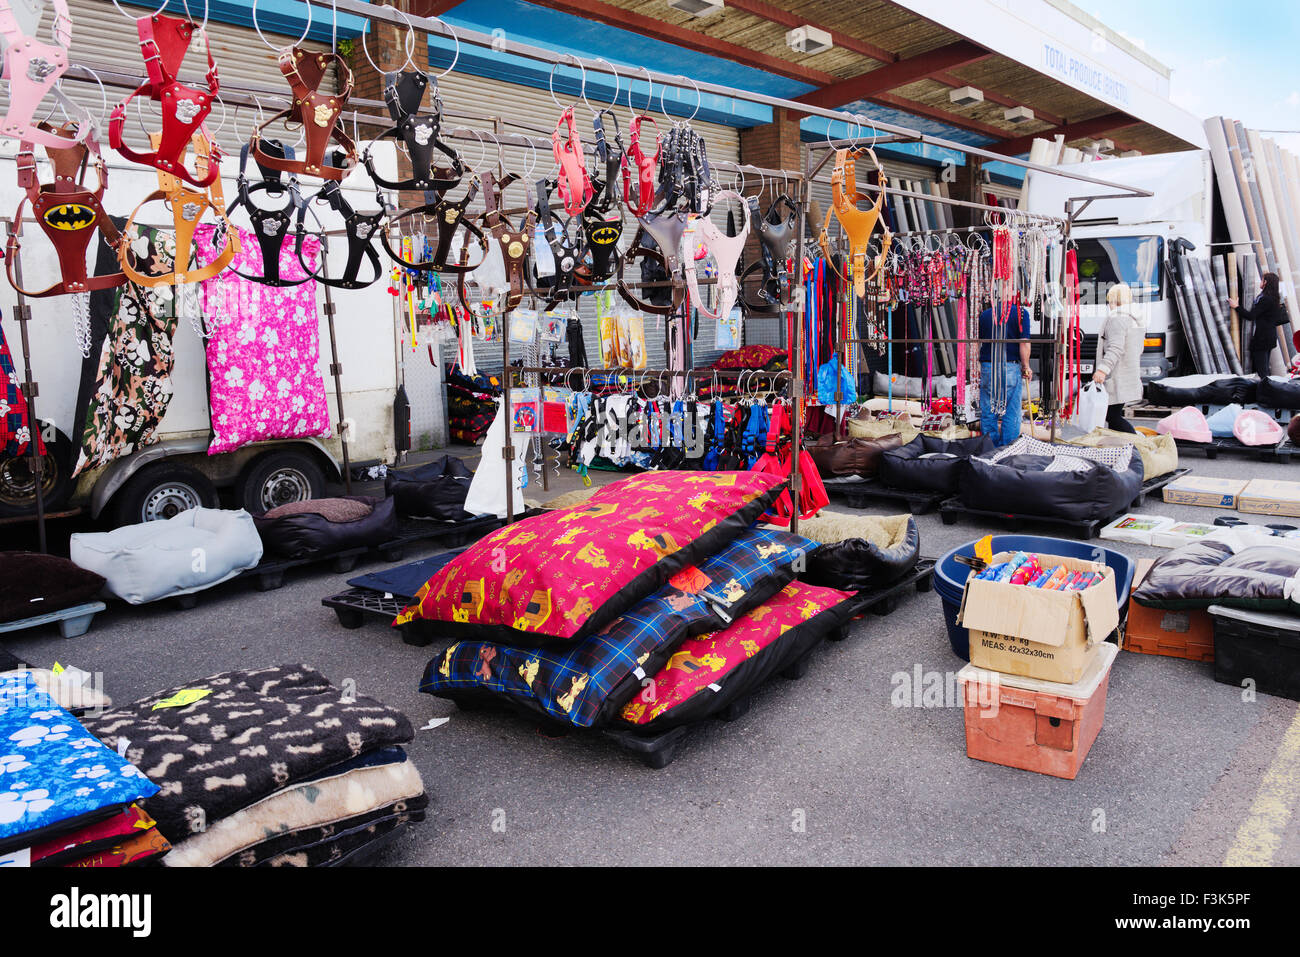 Dog harnesses, beds and other accessories for pets in open air market stall Stock Photo